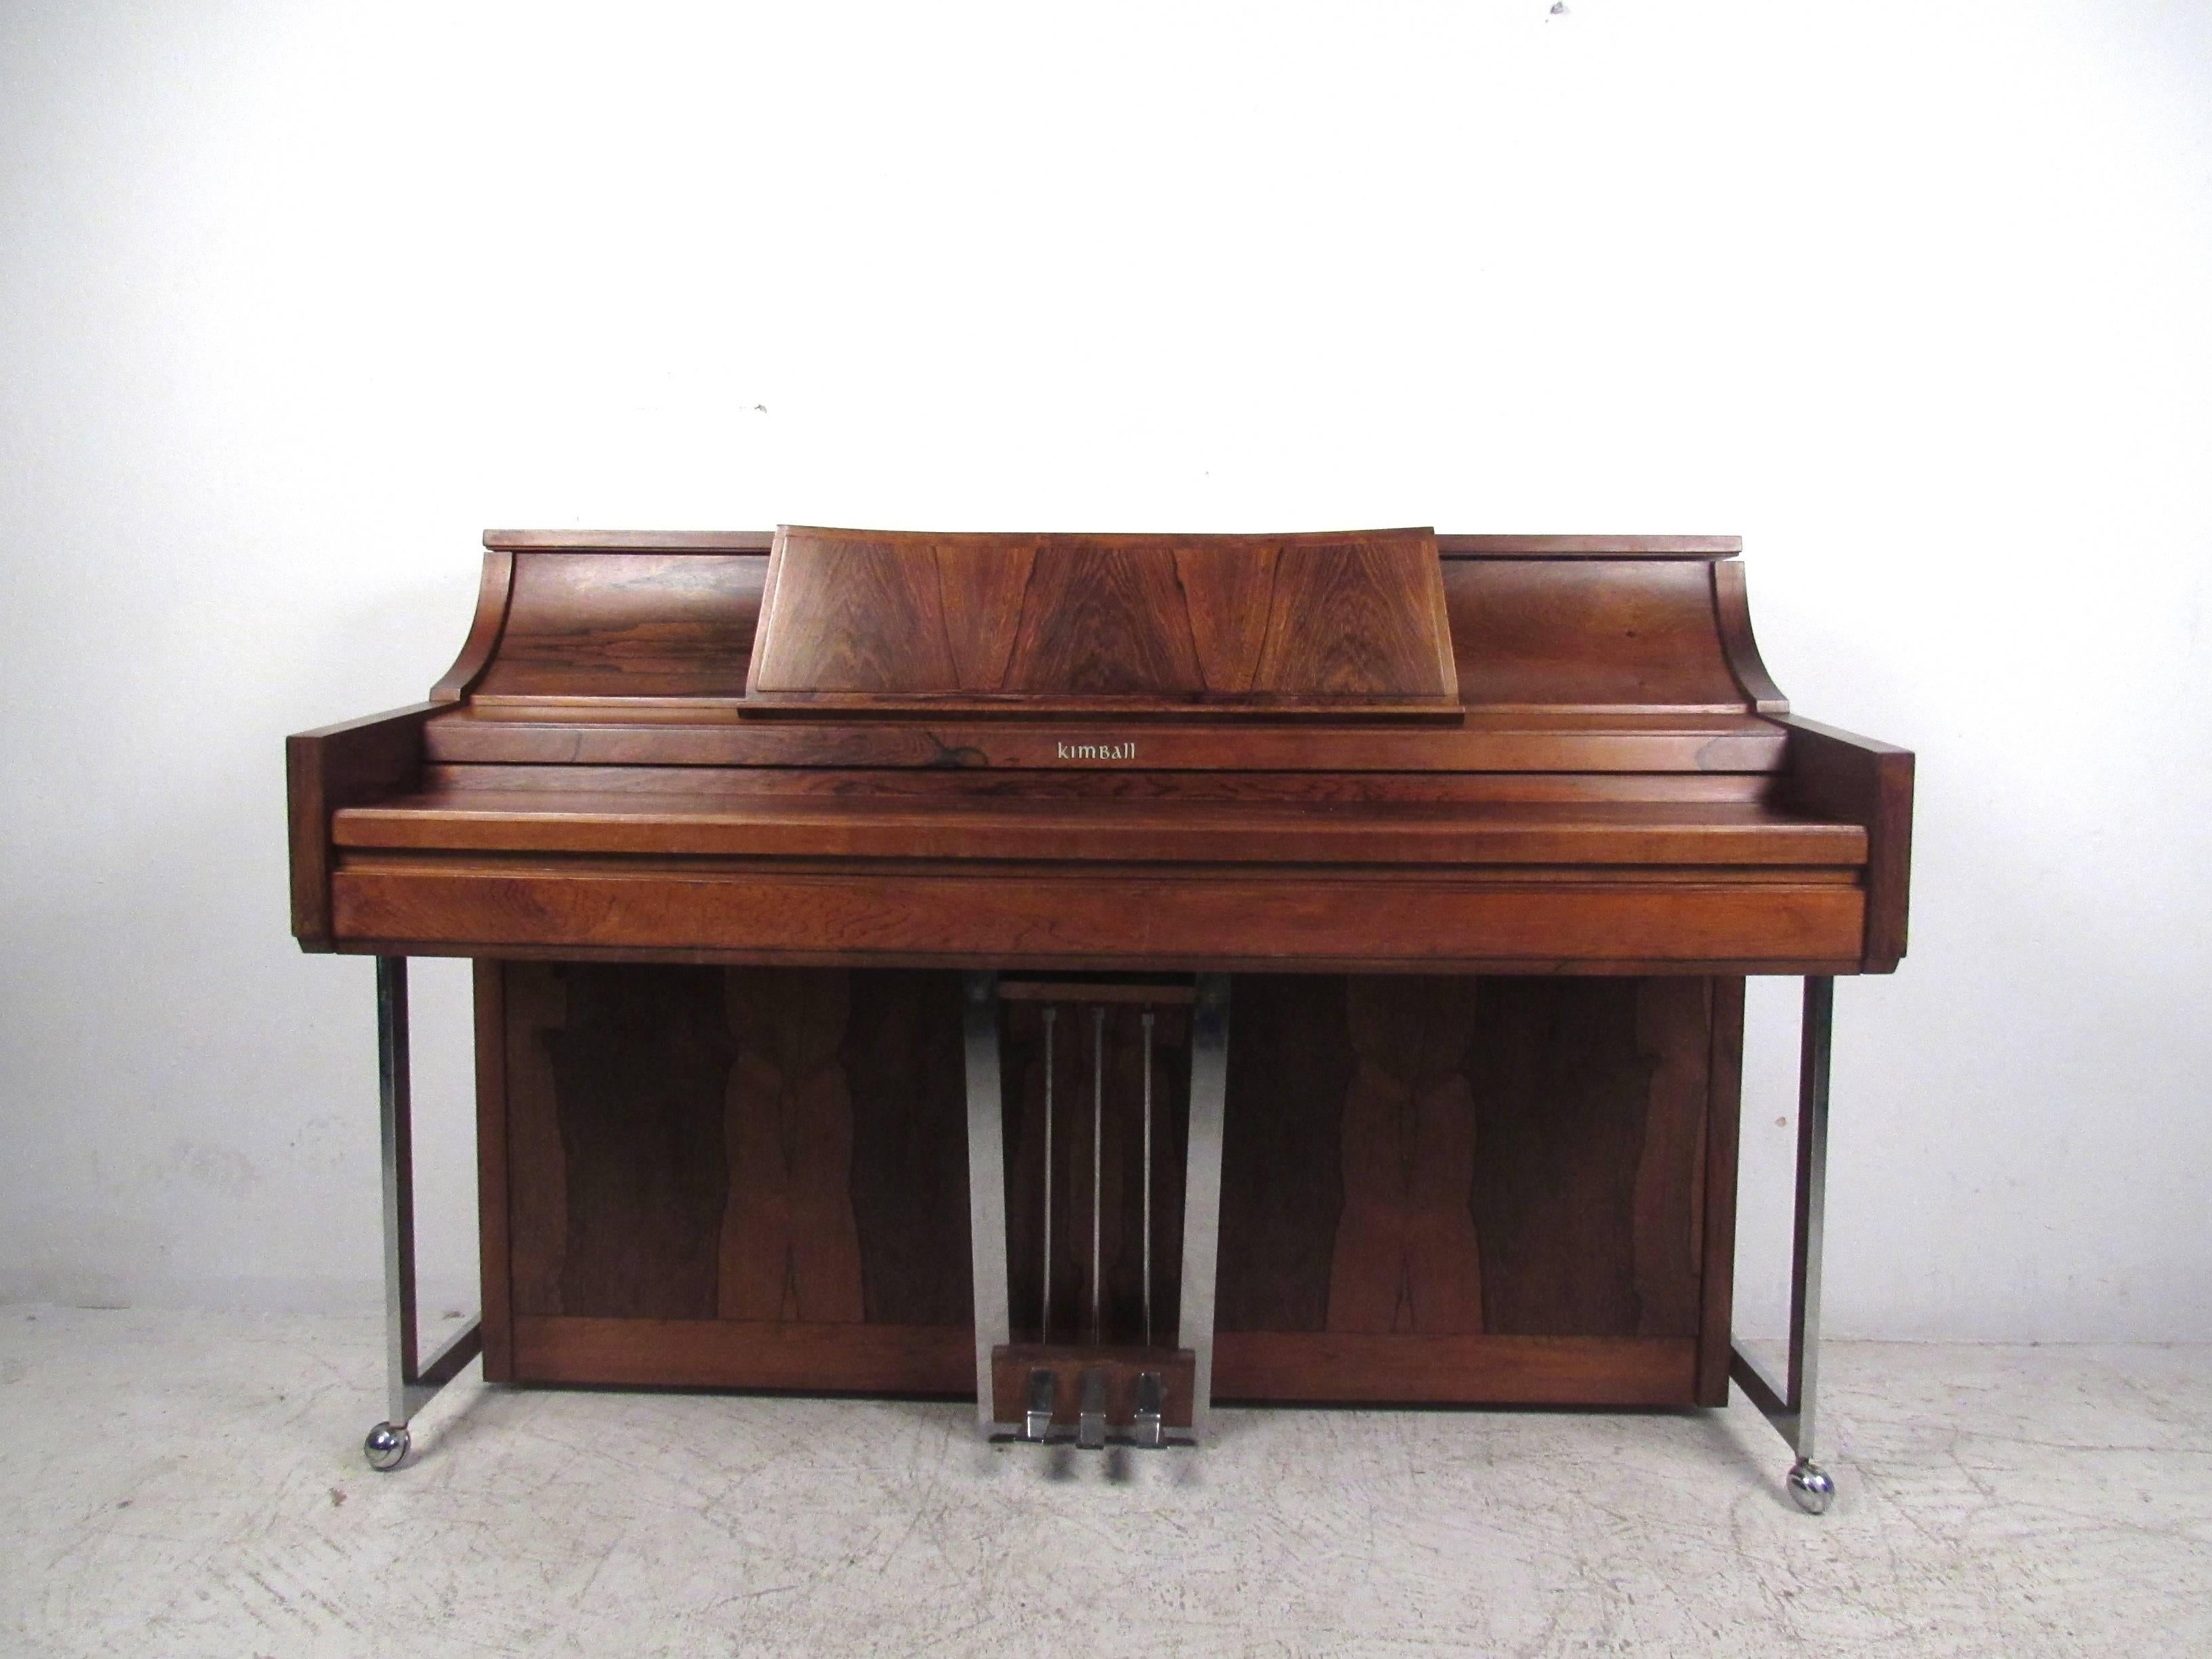 This beautiful rosewood and chrome style features the mid-century design style of the great Milo Baughman and makes a stylish musical addition to any interior. Paired with matching piano bench with added storage, this beautiful yet compact piano is